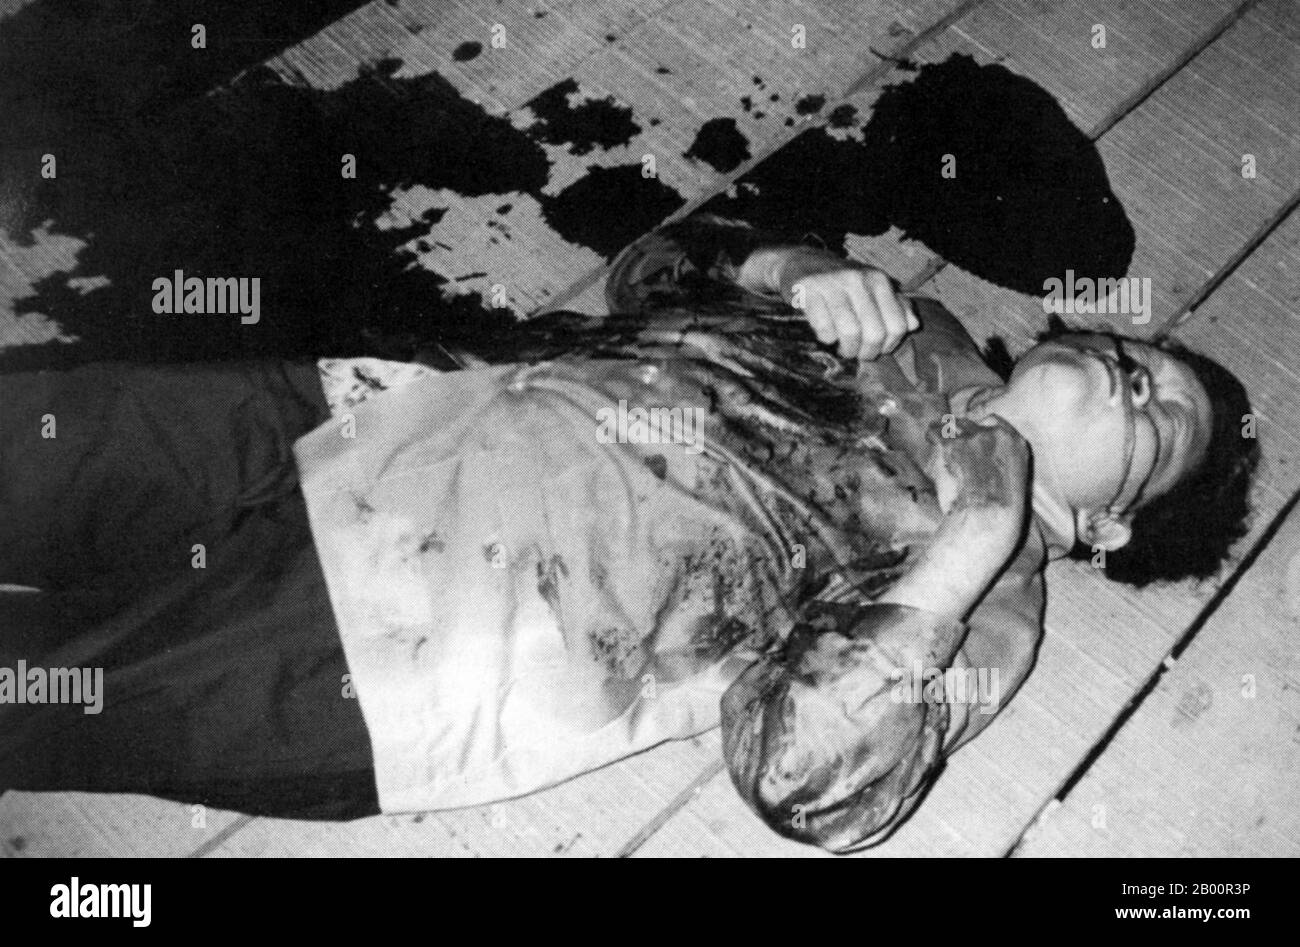 Cambodia: The body of Yun Yat, former DK Information Minister, after her murder/execution at Anlong Veng, June 15, 1997.  Yun Yat, alias Comrade At, was the wife of Son Sen, Defence Minister of Democratic Kampuchea. On October 9, 1975, the Standing Committee of Communist Party of Kampuchea placed her in charge of information and education. In 1977, she was appointed as Information Minister. On June 10, 1997 Khieu Samphan declared that Yun Yat and Son Sen had been arrested as spies of Hun Sen and Vietnam, and declared as traitors. Yun Yat, Son Sen and eight relatives were subsequently executed. Stock Photo